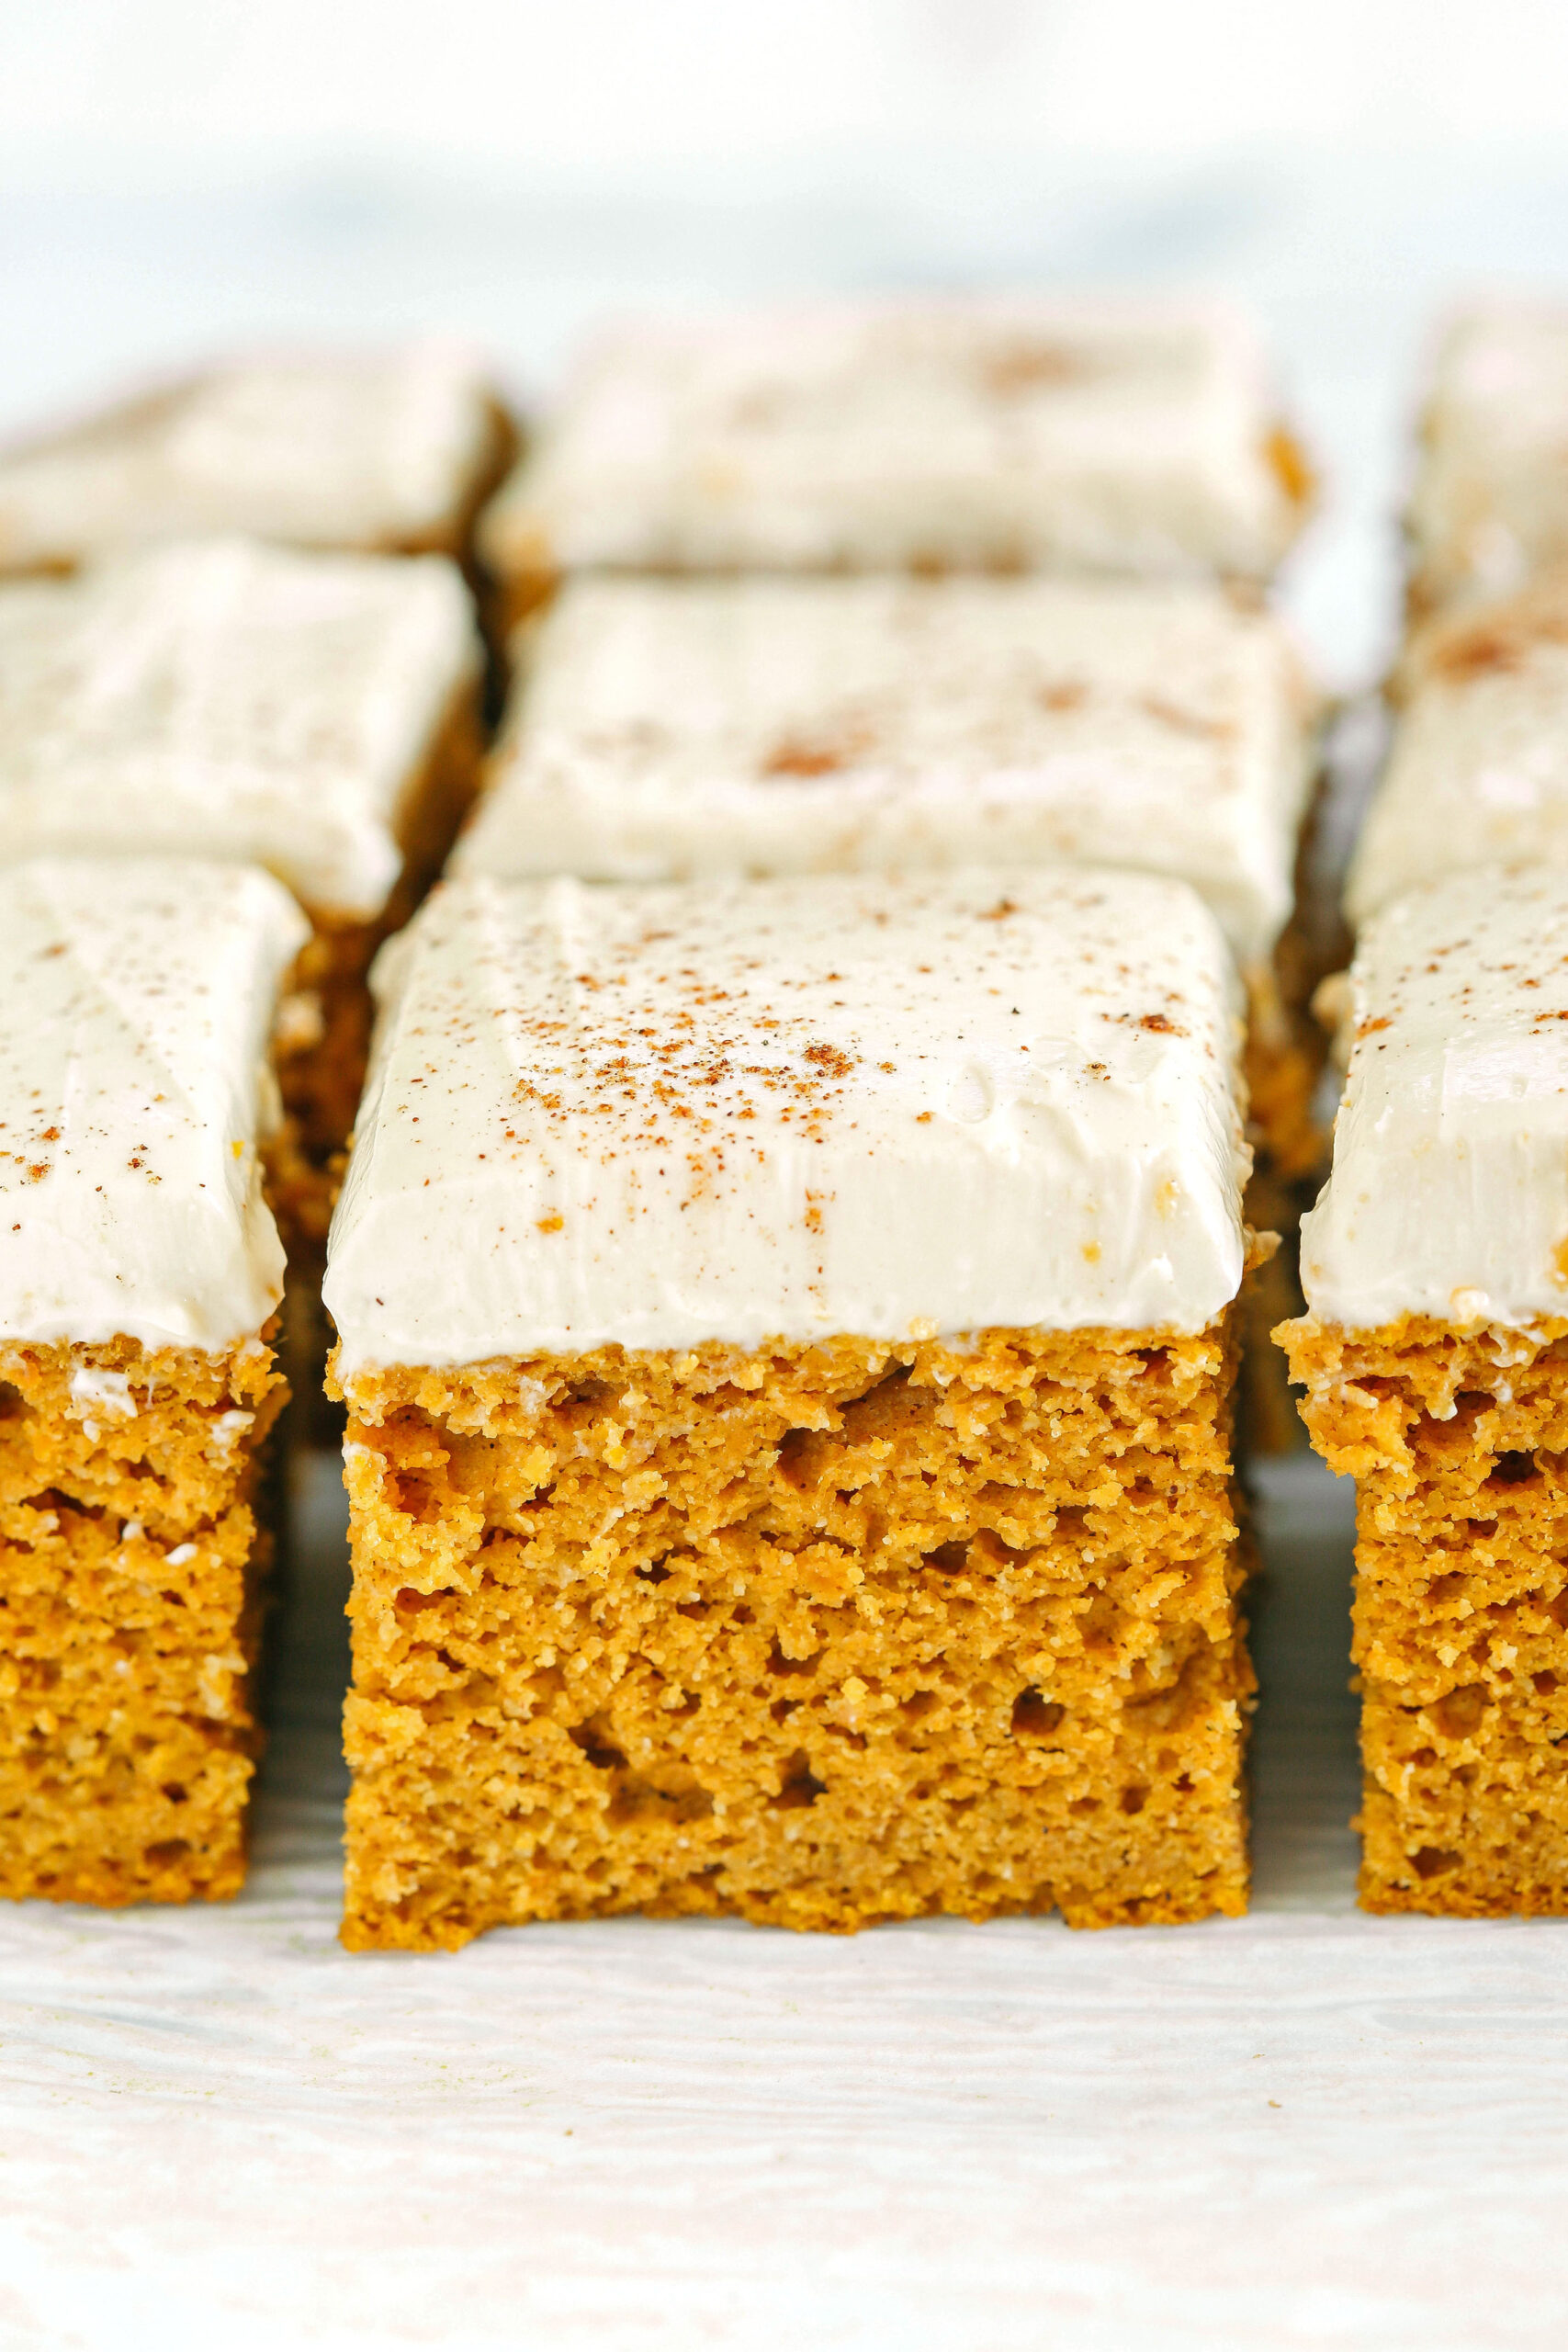 These Healthier Pumpkin Bars are moist, taste just like cake, and are made without any butter, oil or refined sugar!  Topped with a delicious maple cream cheese frosting and loaded with so much pumpkin flavor!